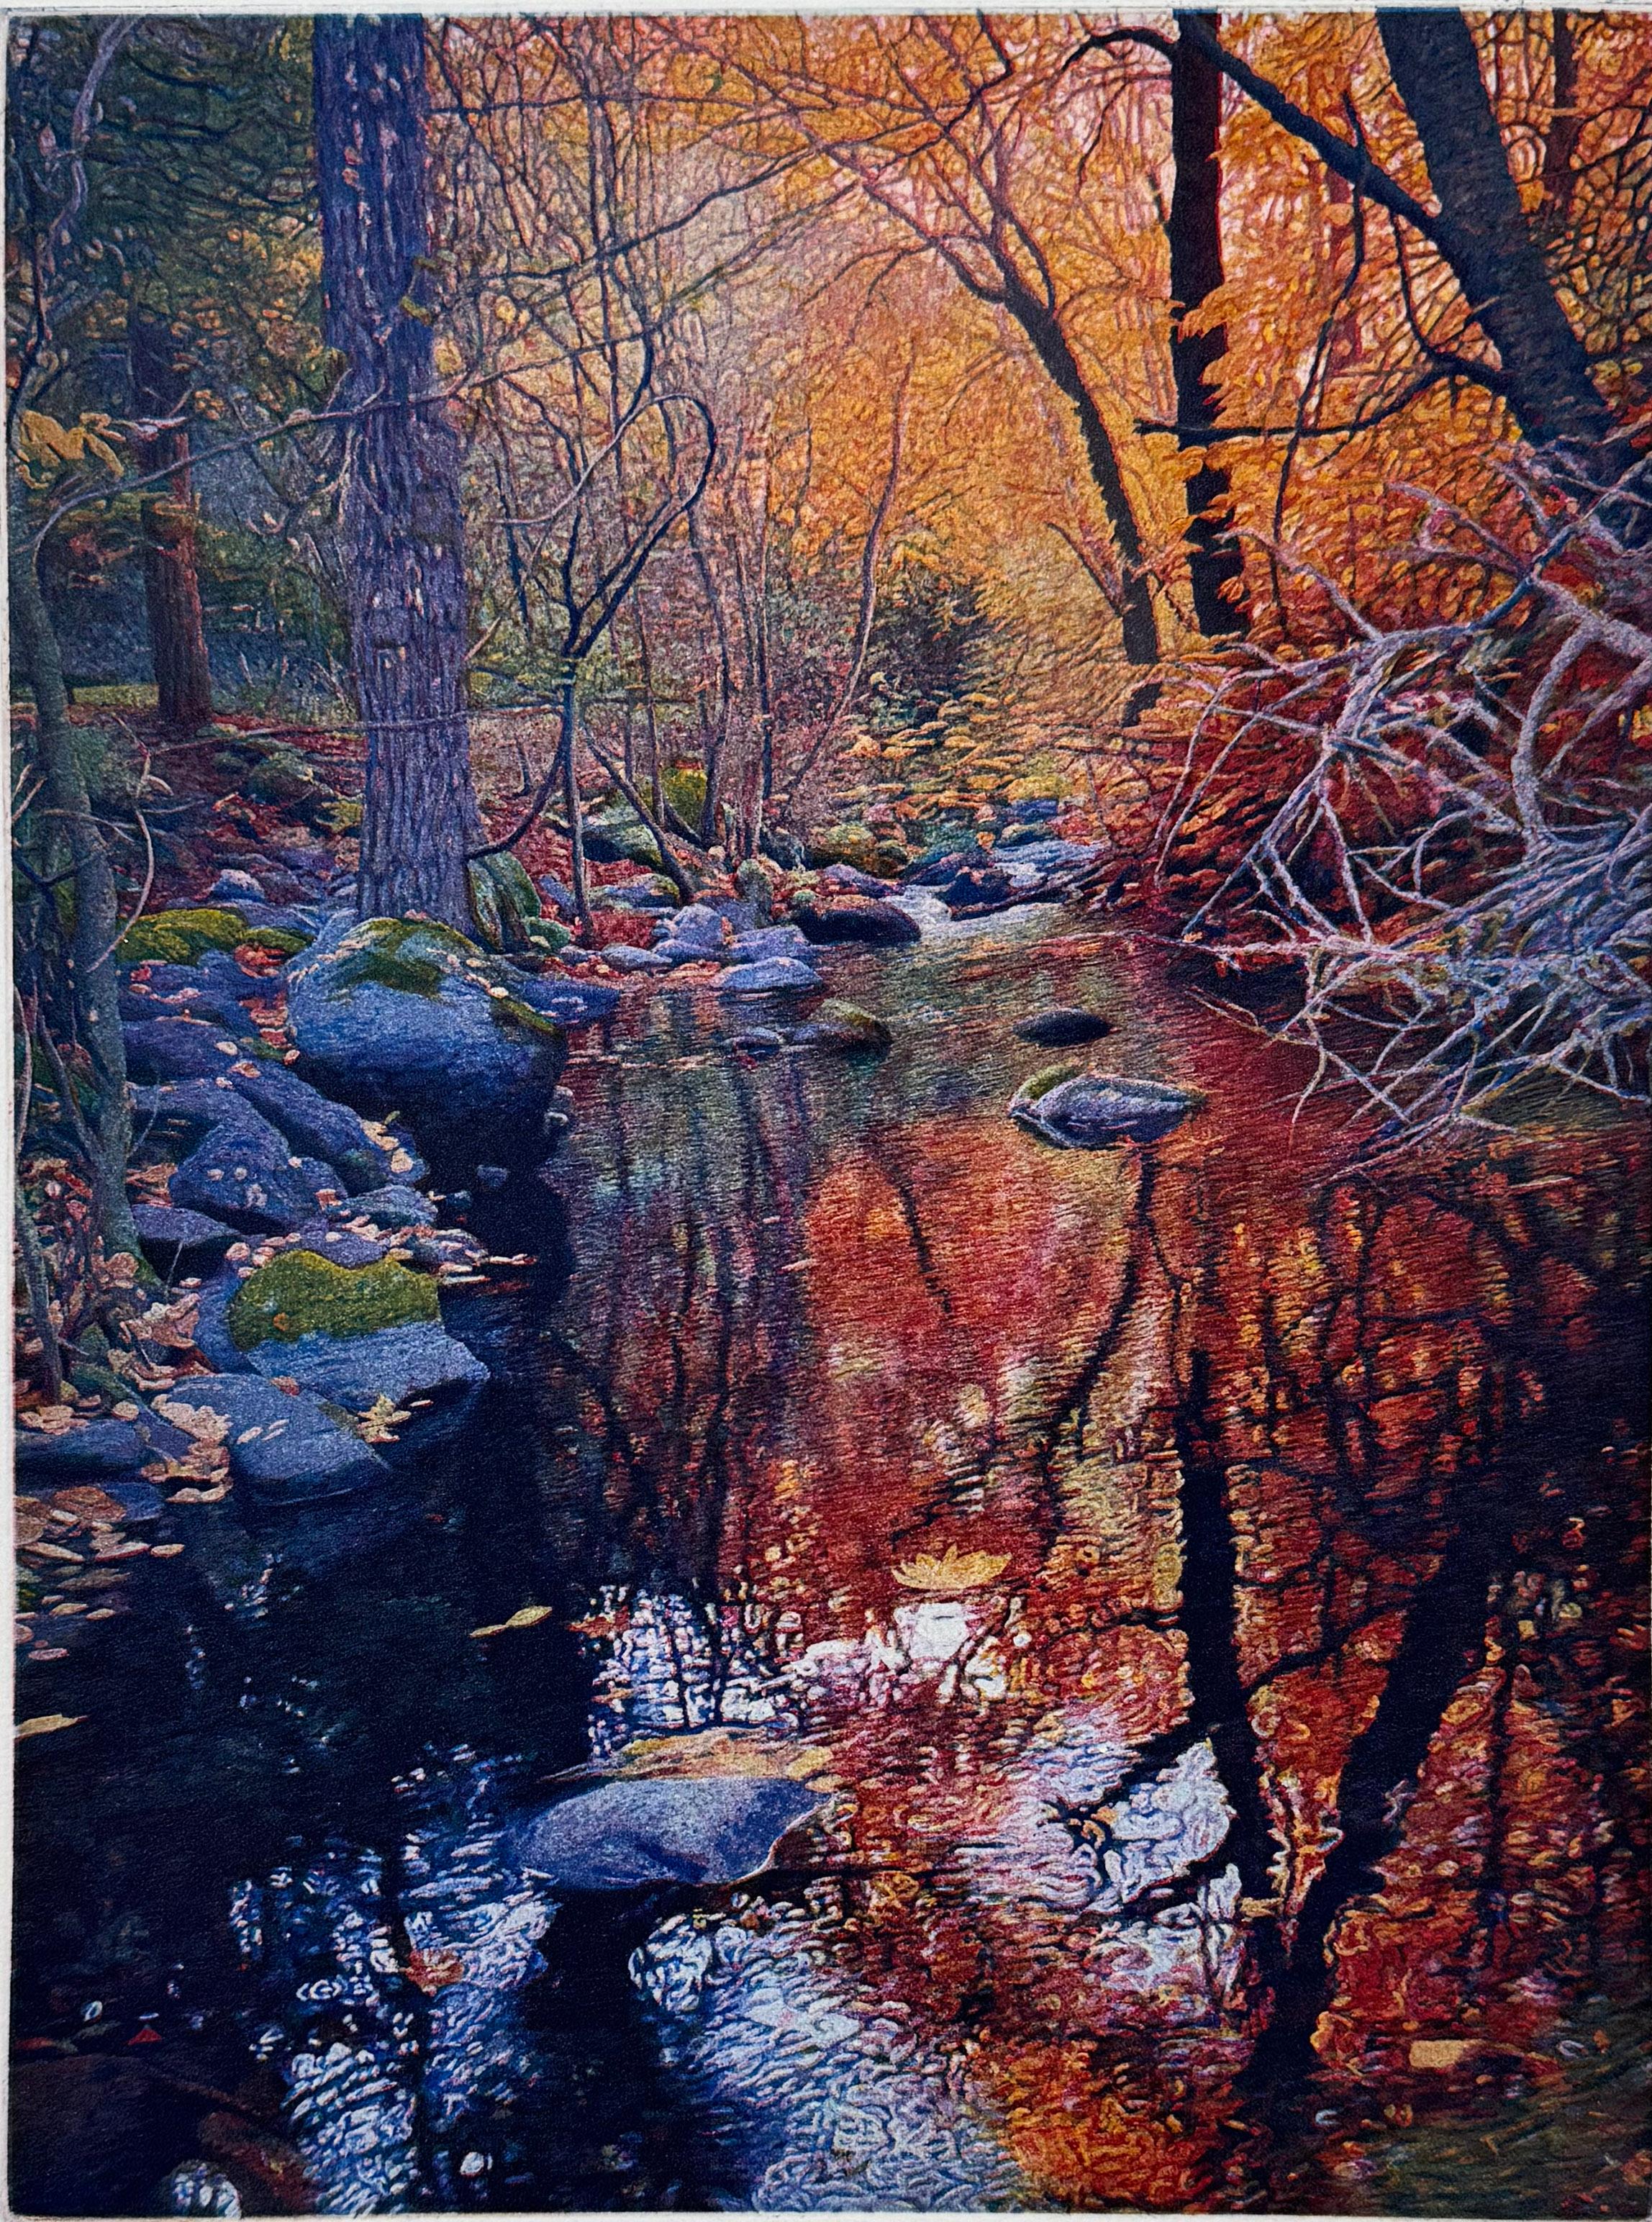 Signed, titled and numbered by the artist. 
Medium: etching and aquatint
Image size:  12 x 9 inches
Year: 2019

Fall colors along Ashland Creek in Lithia Park. 

Born in Berkeley, California, on December 21, 1949, he was raised in a home that had a